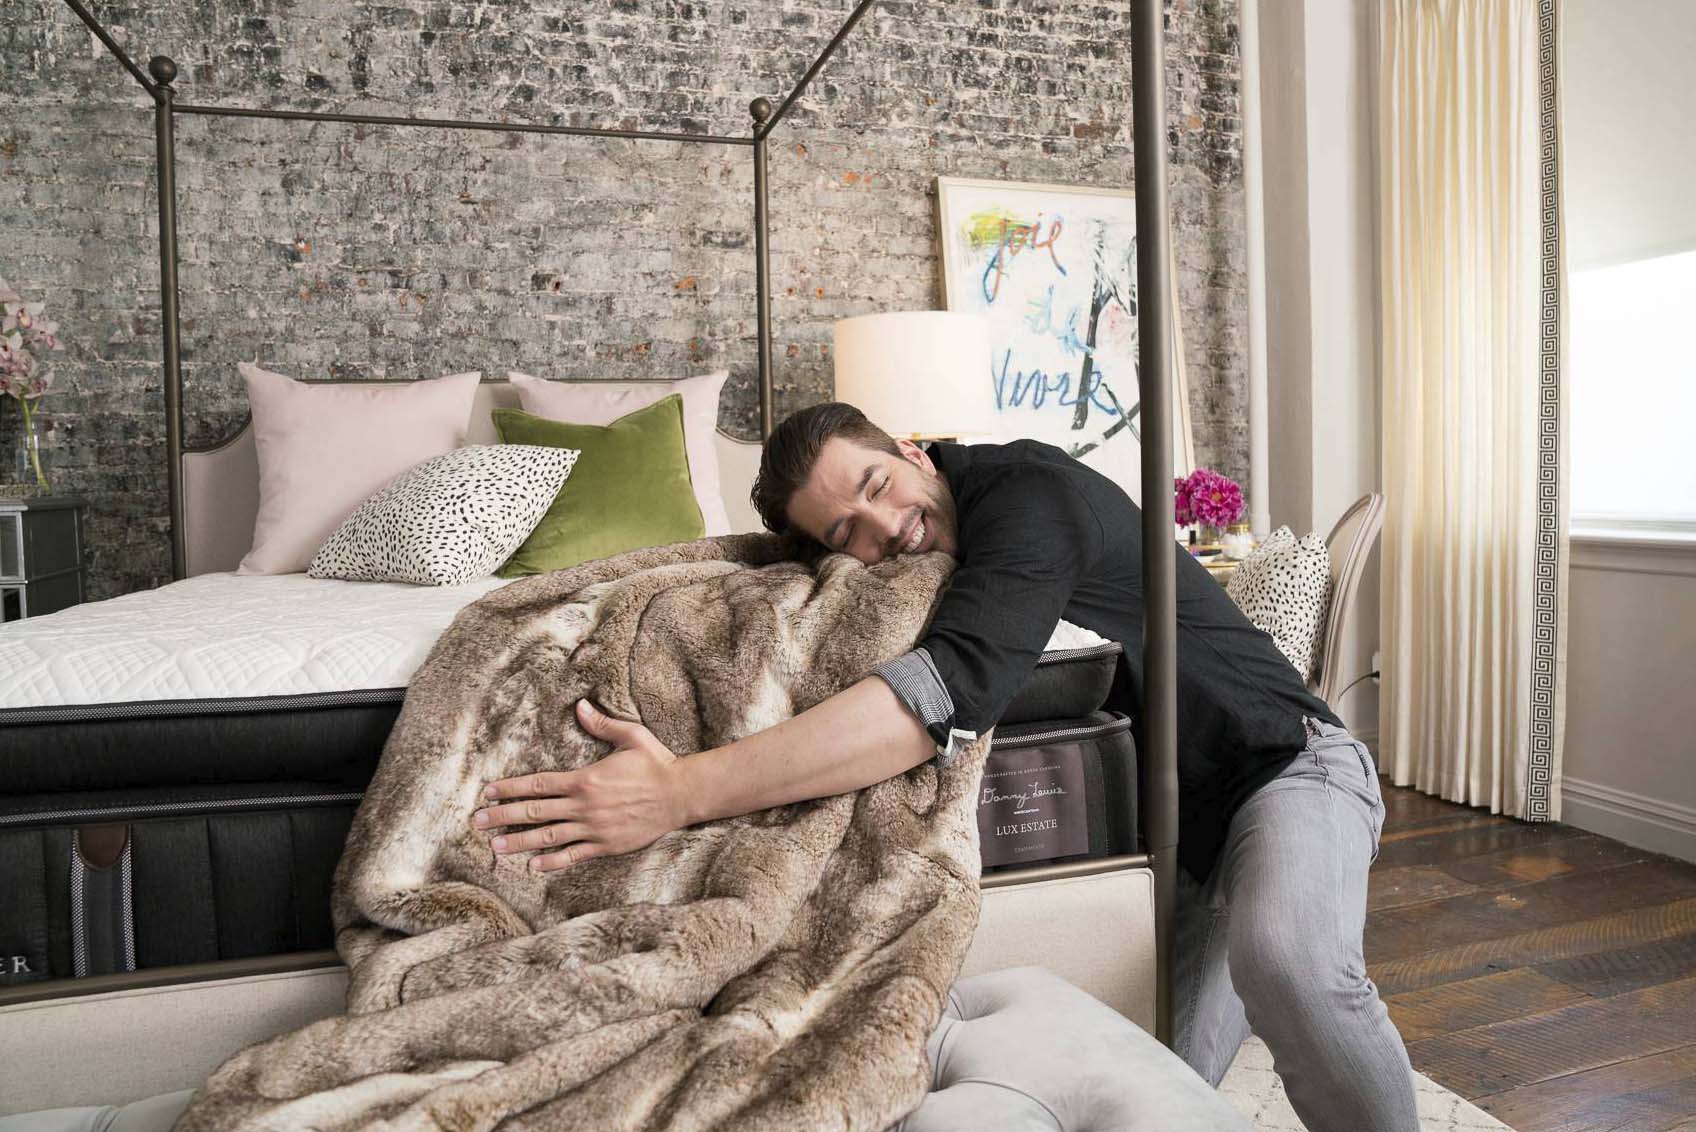 Jonathan Scott Shows It’s Hard To Get Up From The Lux Estate In The Edgy Glam Room